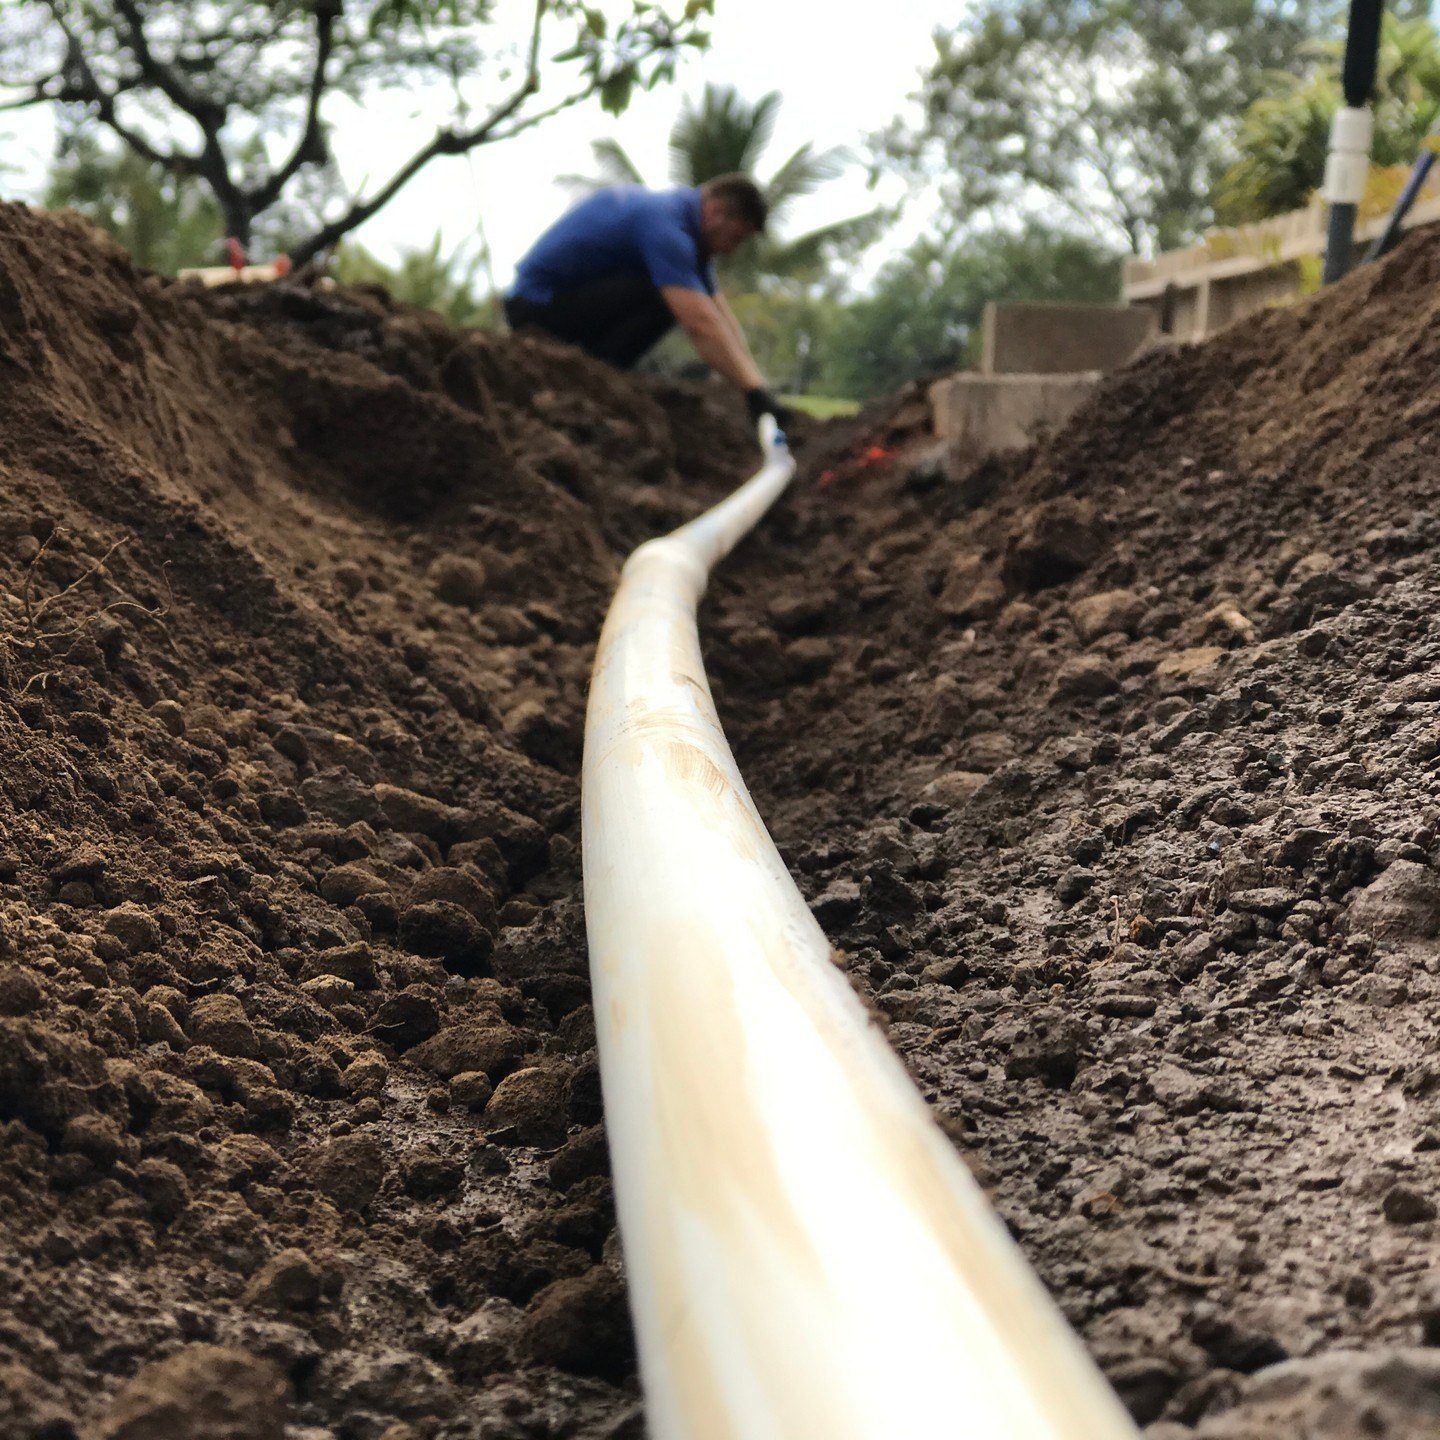 Professional installation of an irrigation system on Hawaii. Sprinkler and drip systems use pvc pipe like the one shown in the image to connect water lines.